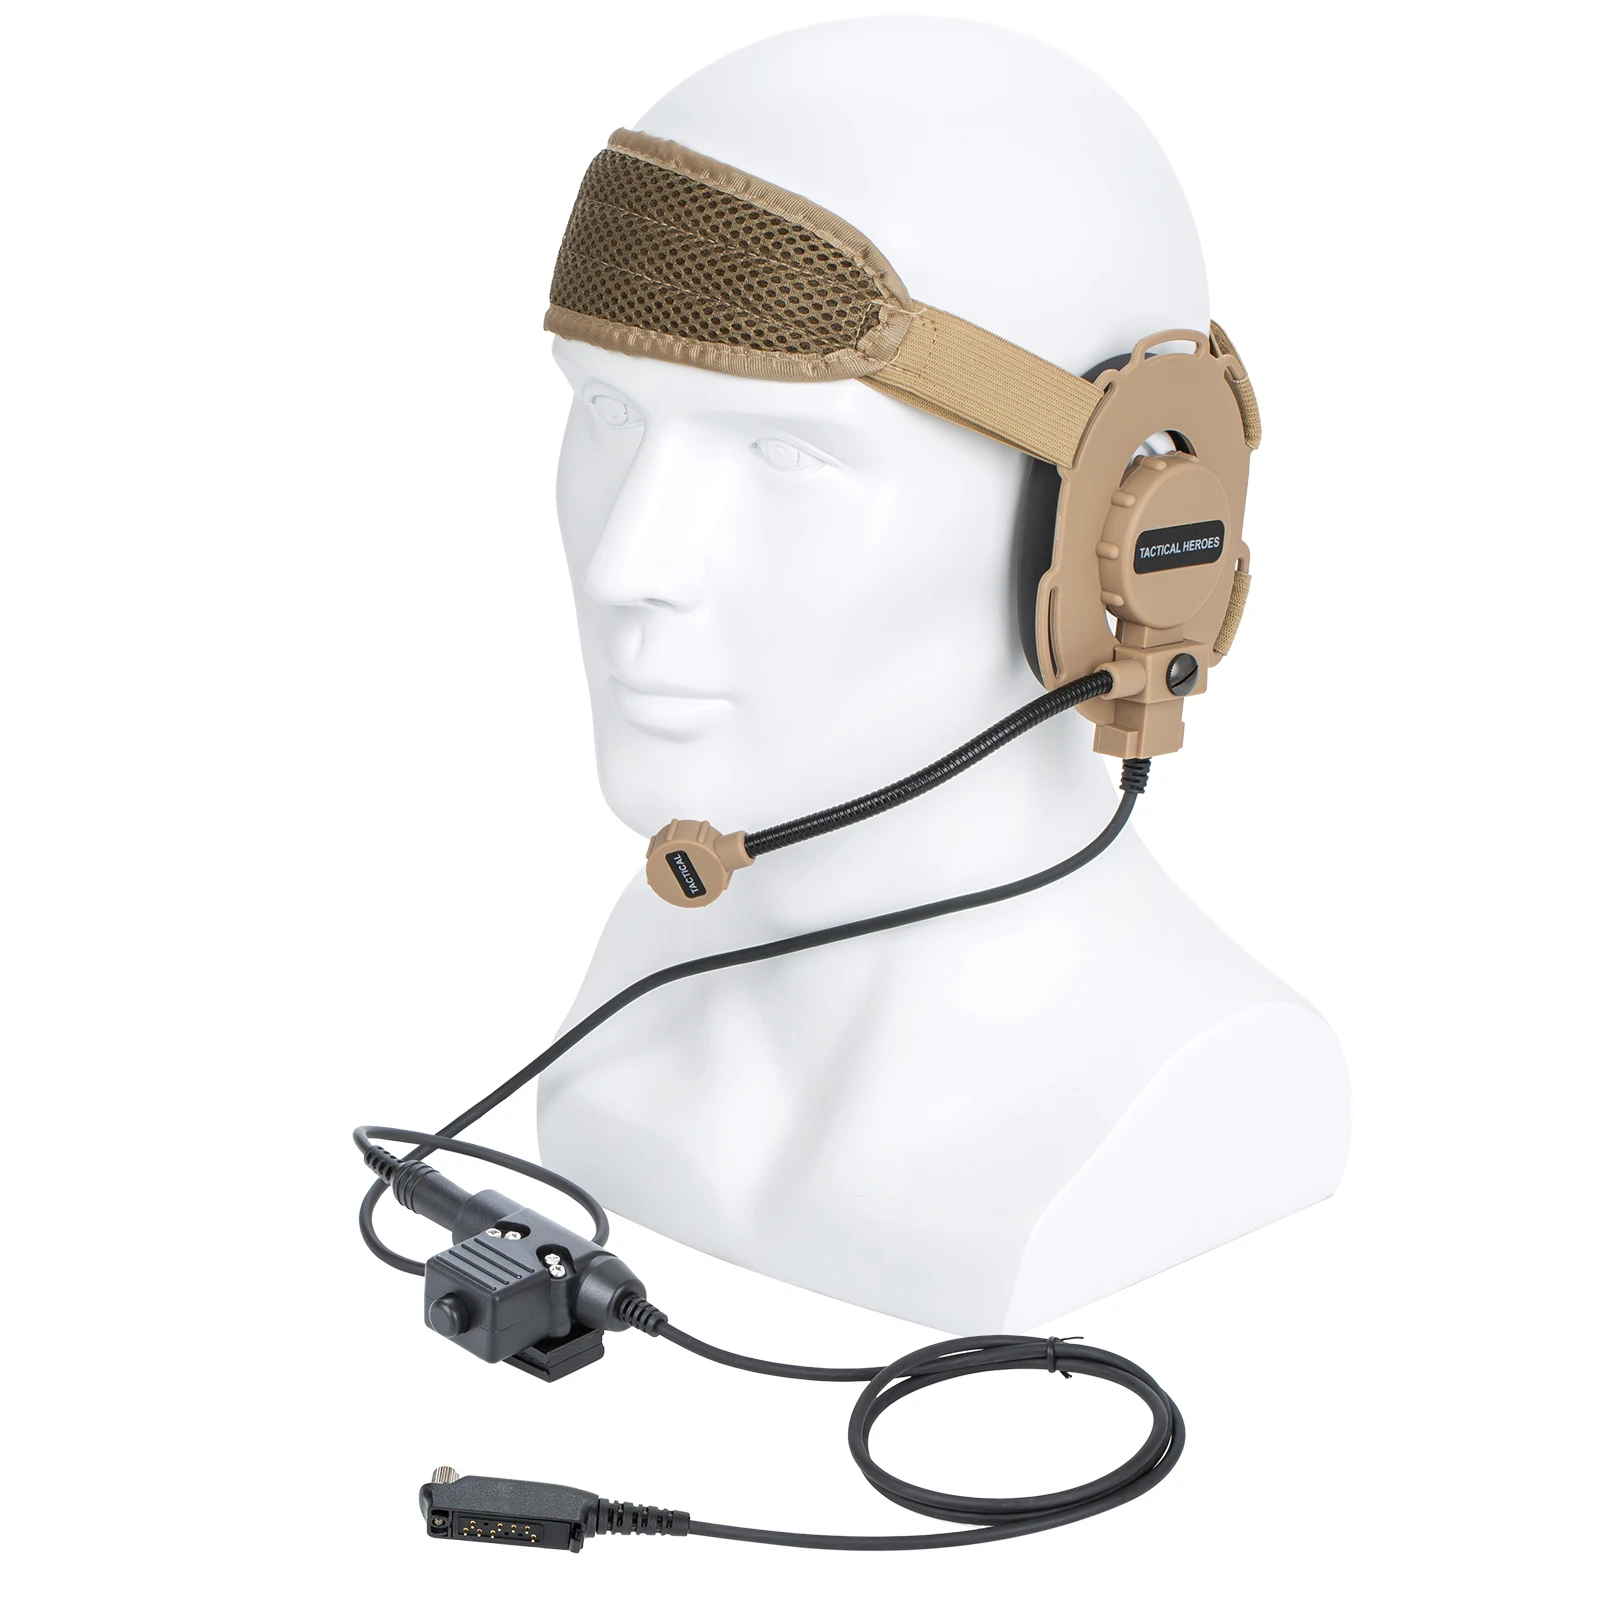 brown HD03 Tactical Bowman Elite II Headset Microphone with U94 PTT for Sepura Stp8000 Stp8030 Stp8035 walkie talkie Radio stp8000 stp9000 stp8035 earphone 2 wire walkie talkie accessories earpiece headset with ptt mic compatible for sepura radio